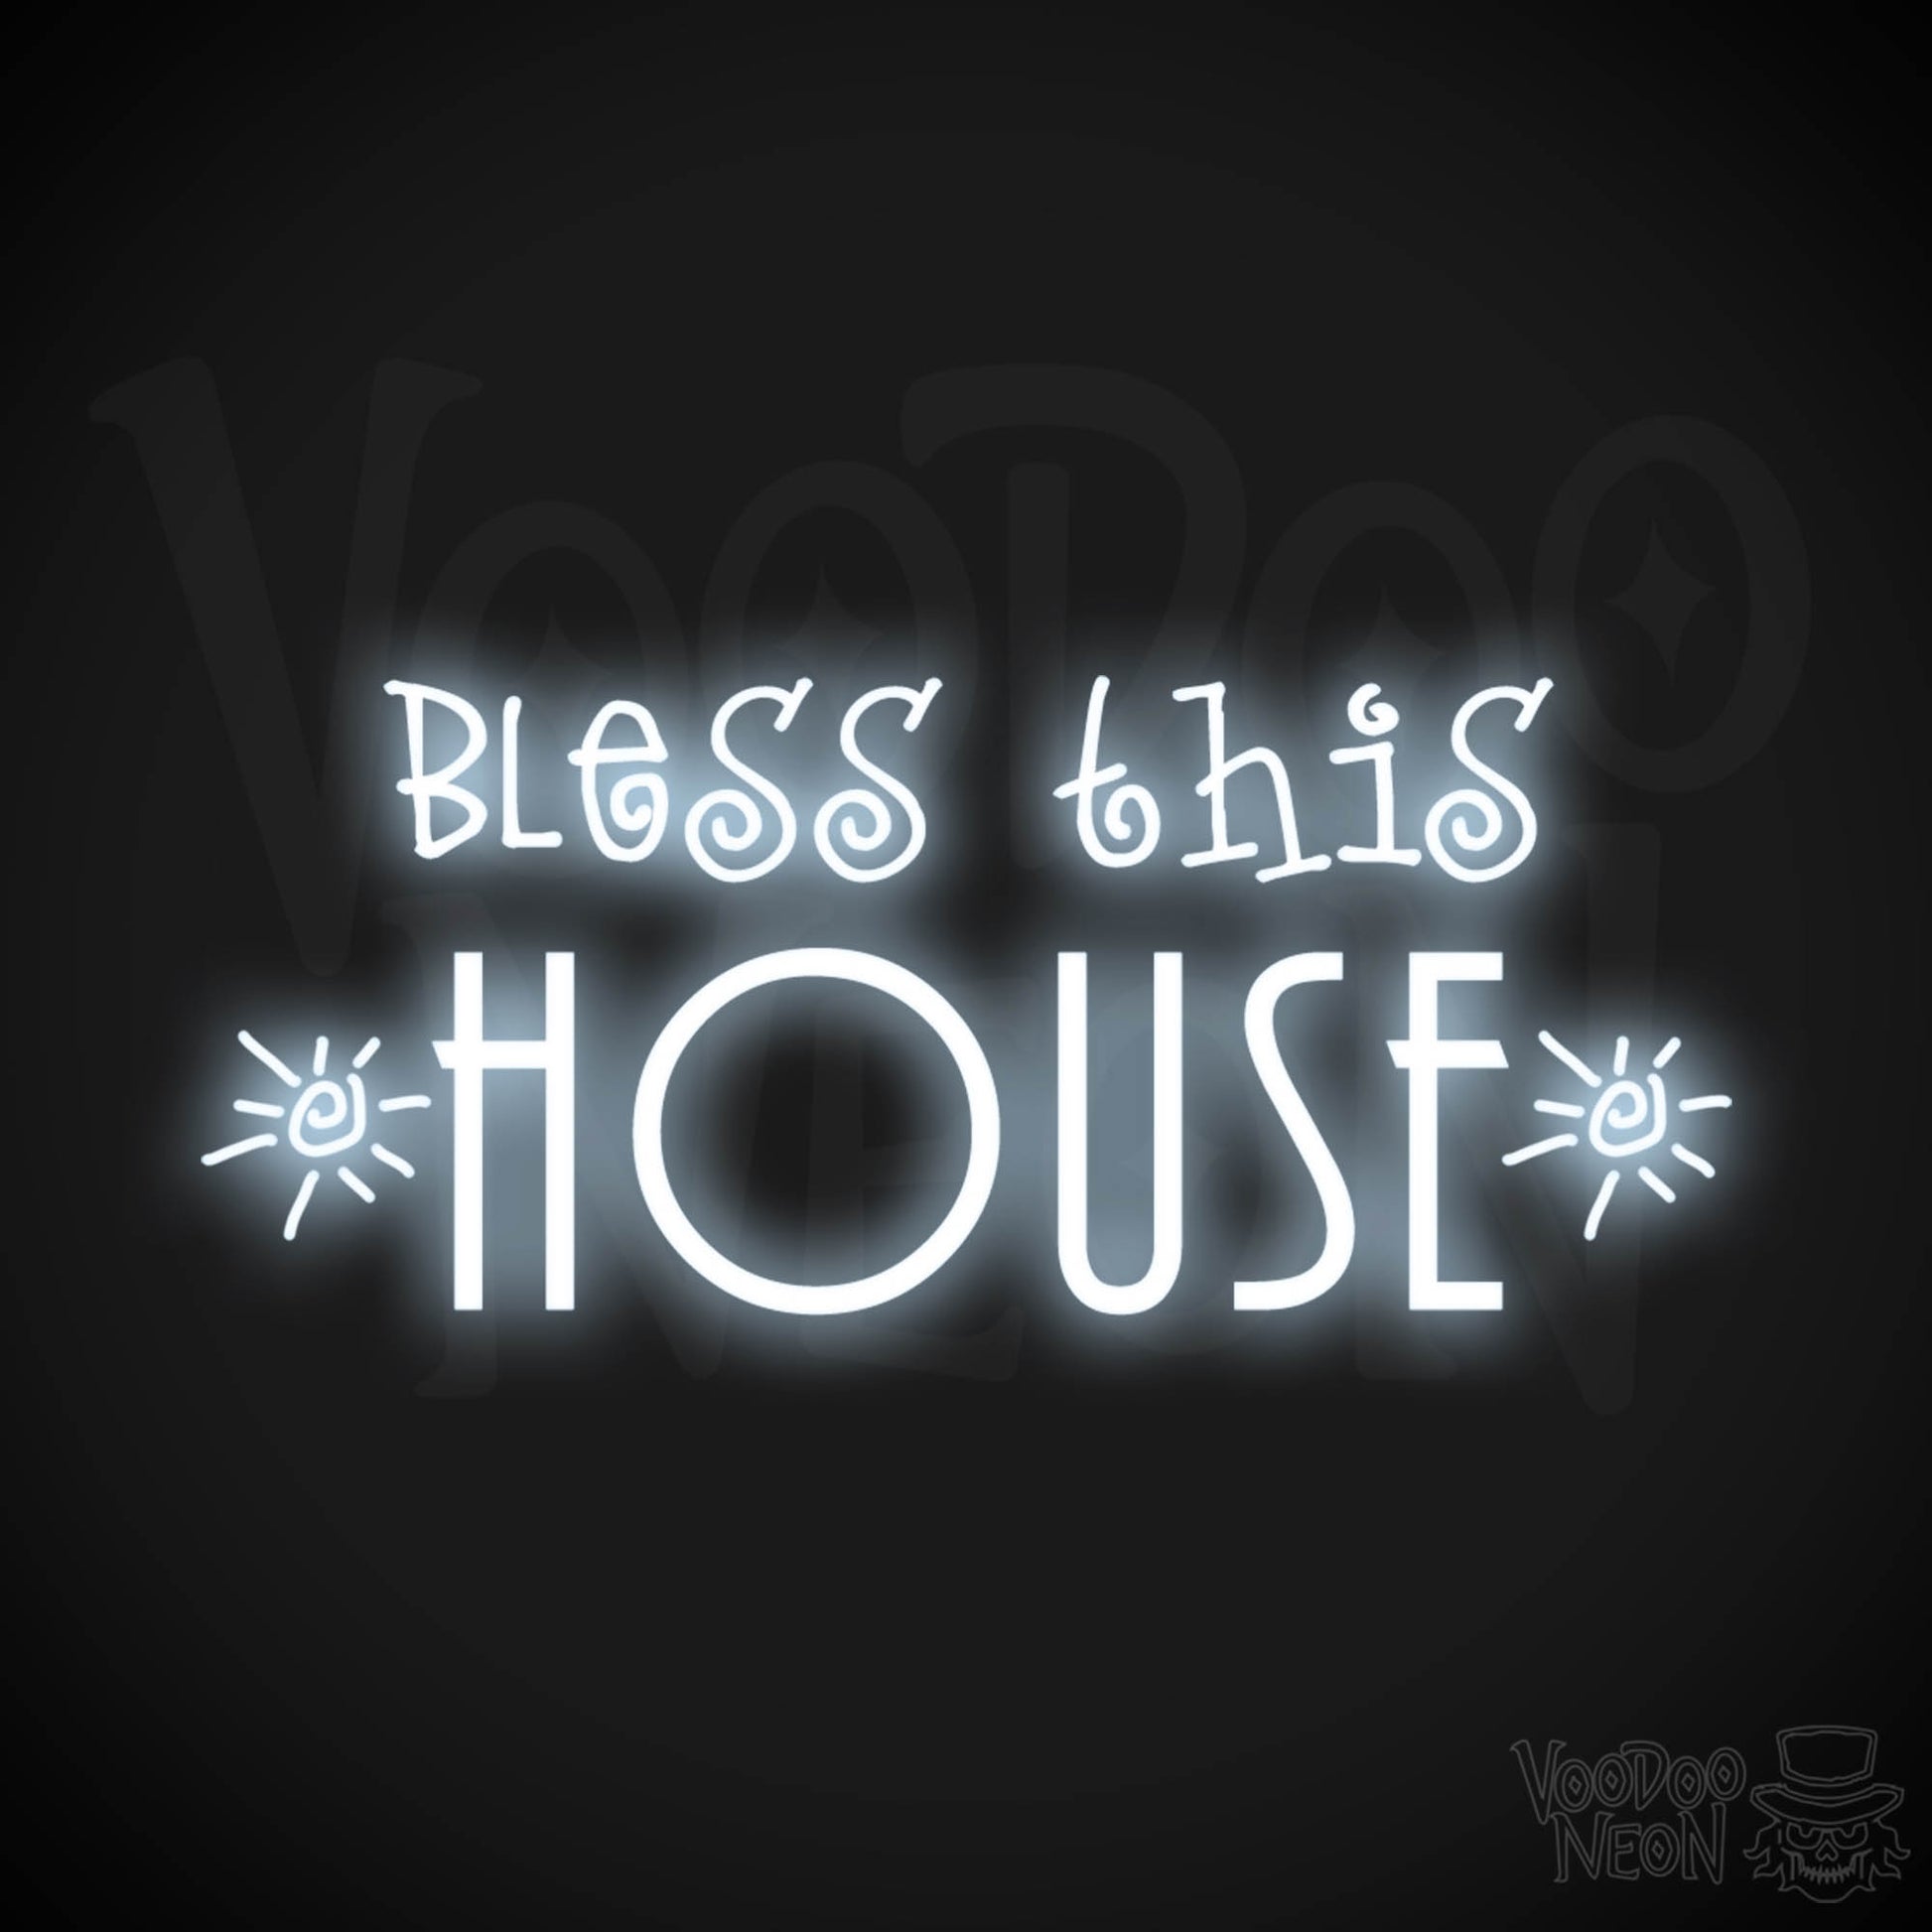 Bless This House Neon Sign - Neon Bless This House Sign - LED Light Up Sign - Color Cool White